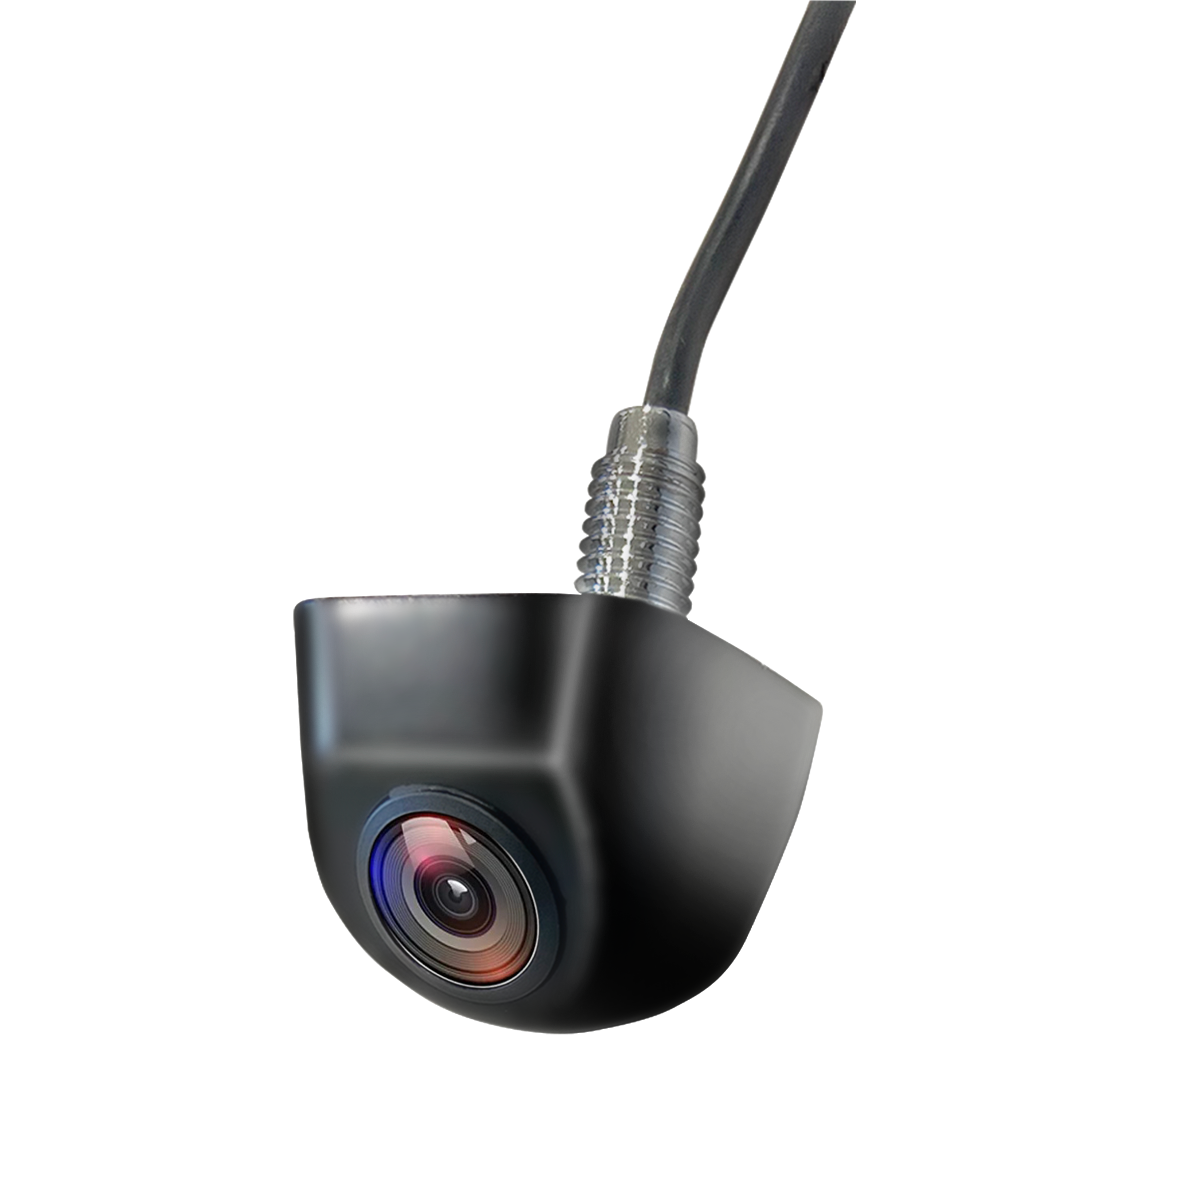 AutoSky HD Back up Camera - Metal OEM Style housing, Waterproof, Night Vision and Ultra Wide Angle